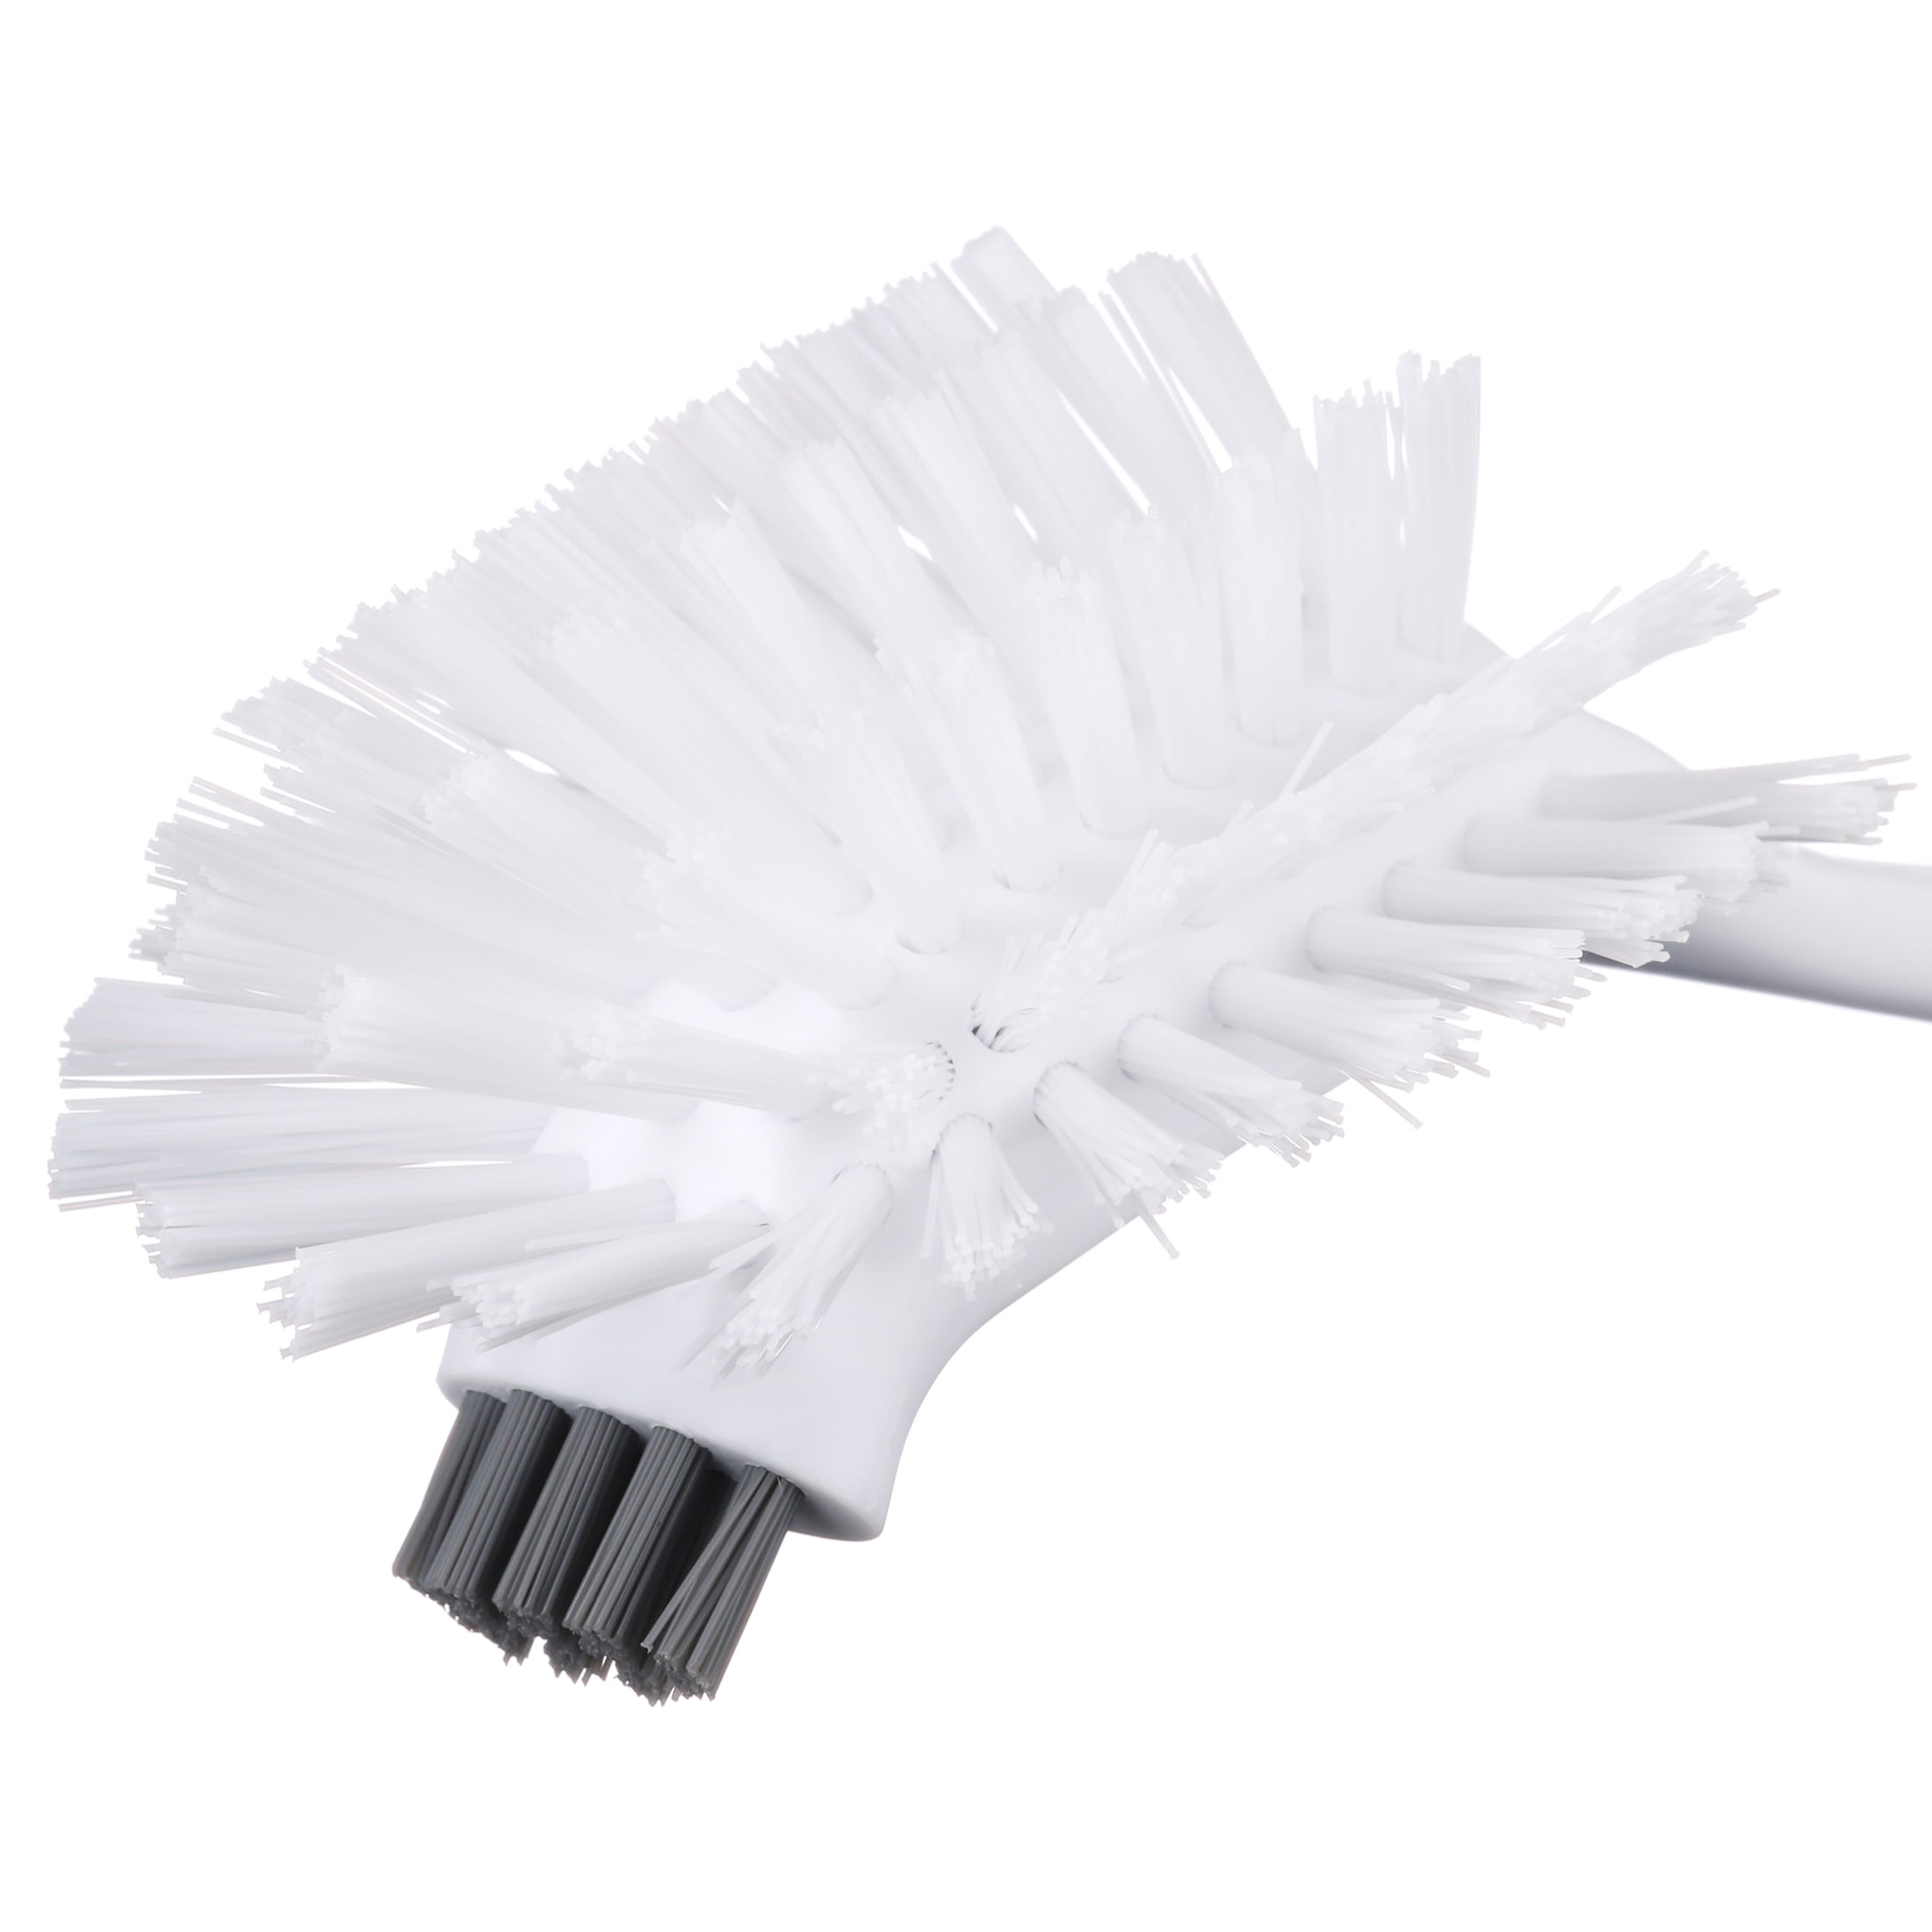 KITCHEN WASTE FOOD DISPOSAL BRUSH, Brushtech Brushes Inc. - America's #1  Source for all Specialty and Hard-To-Find Brushes - Buy Direct and Save!